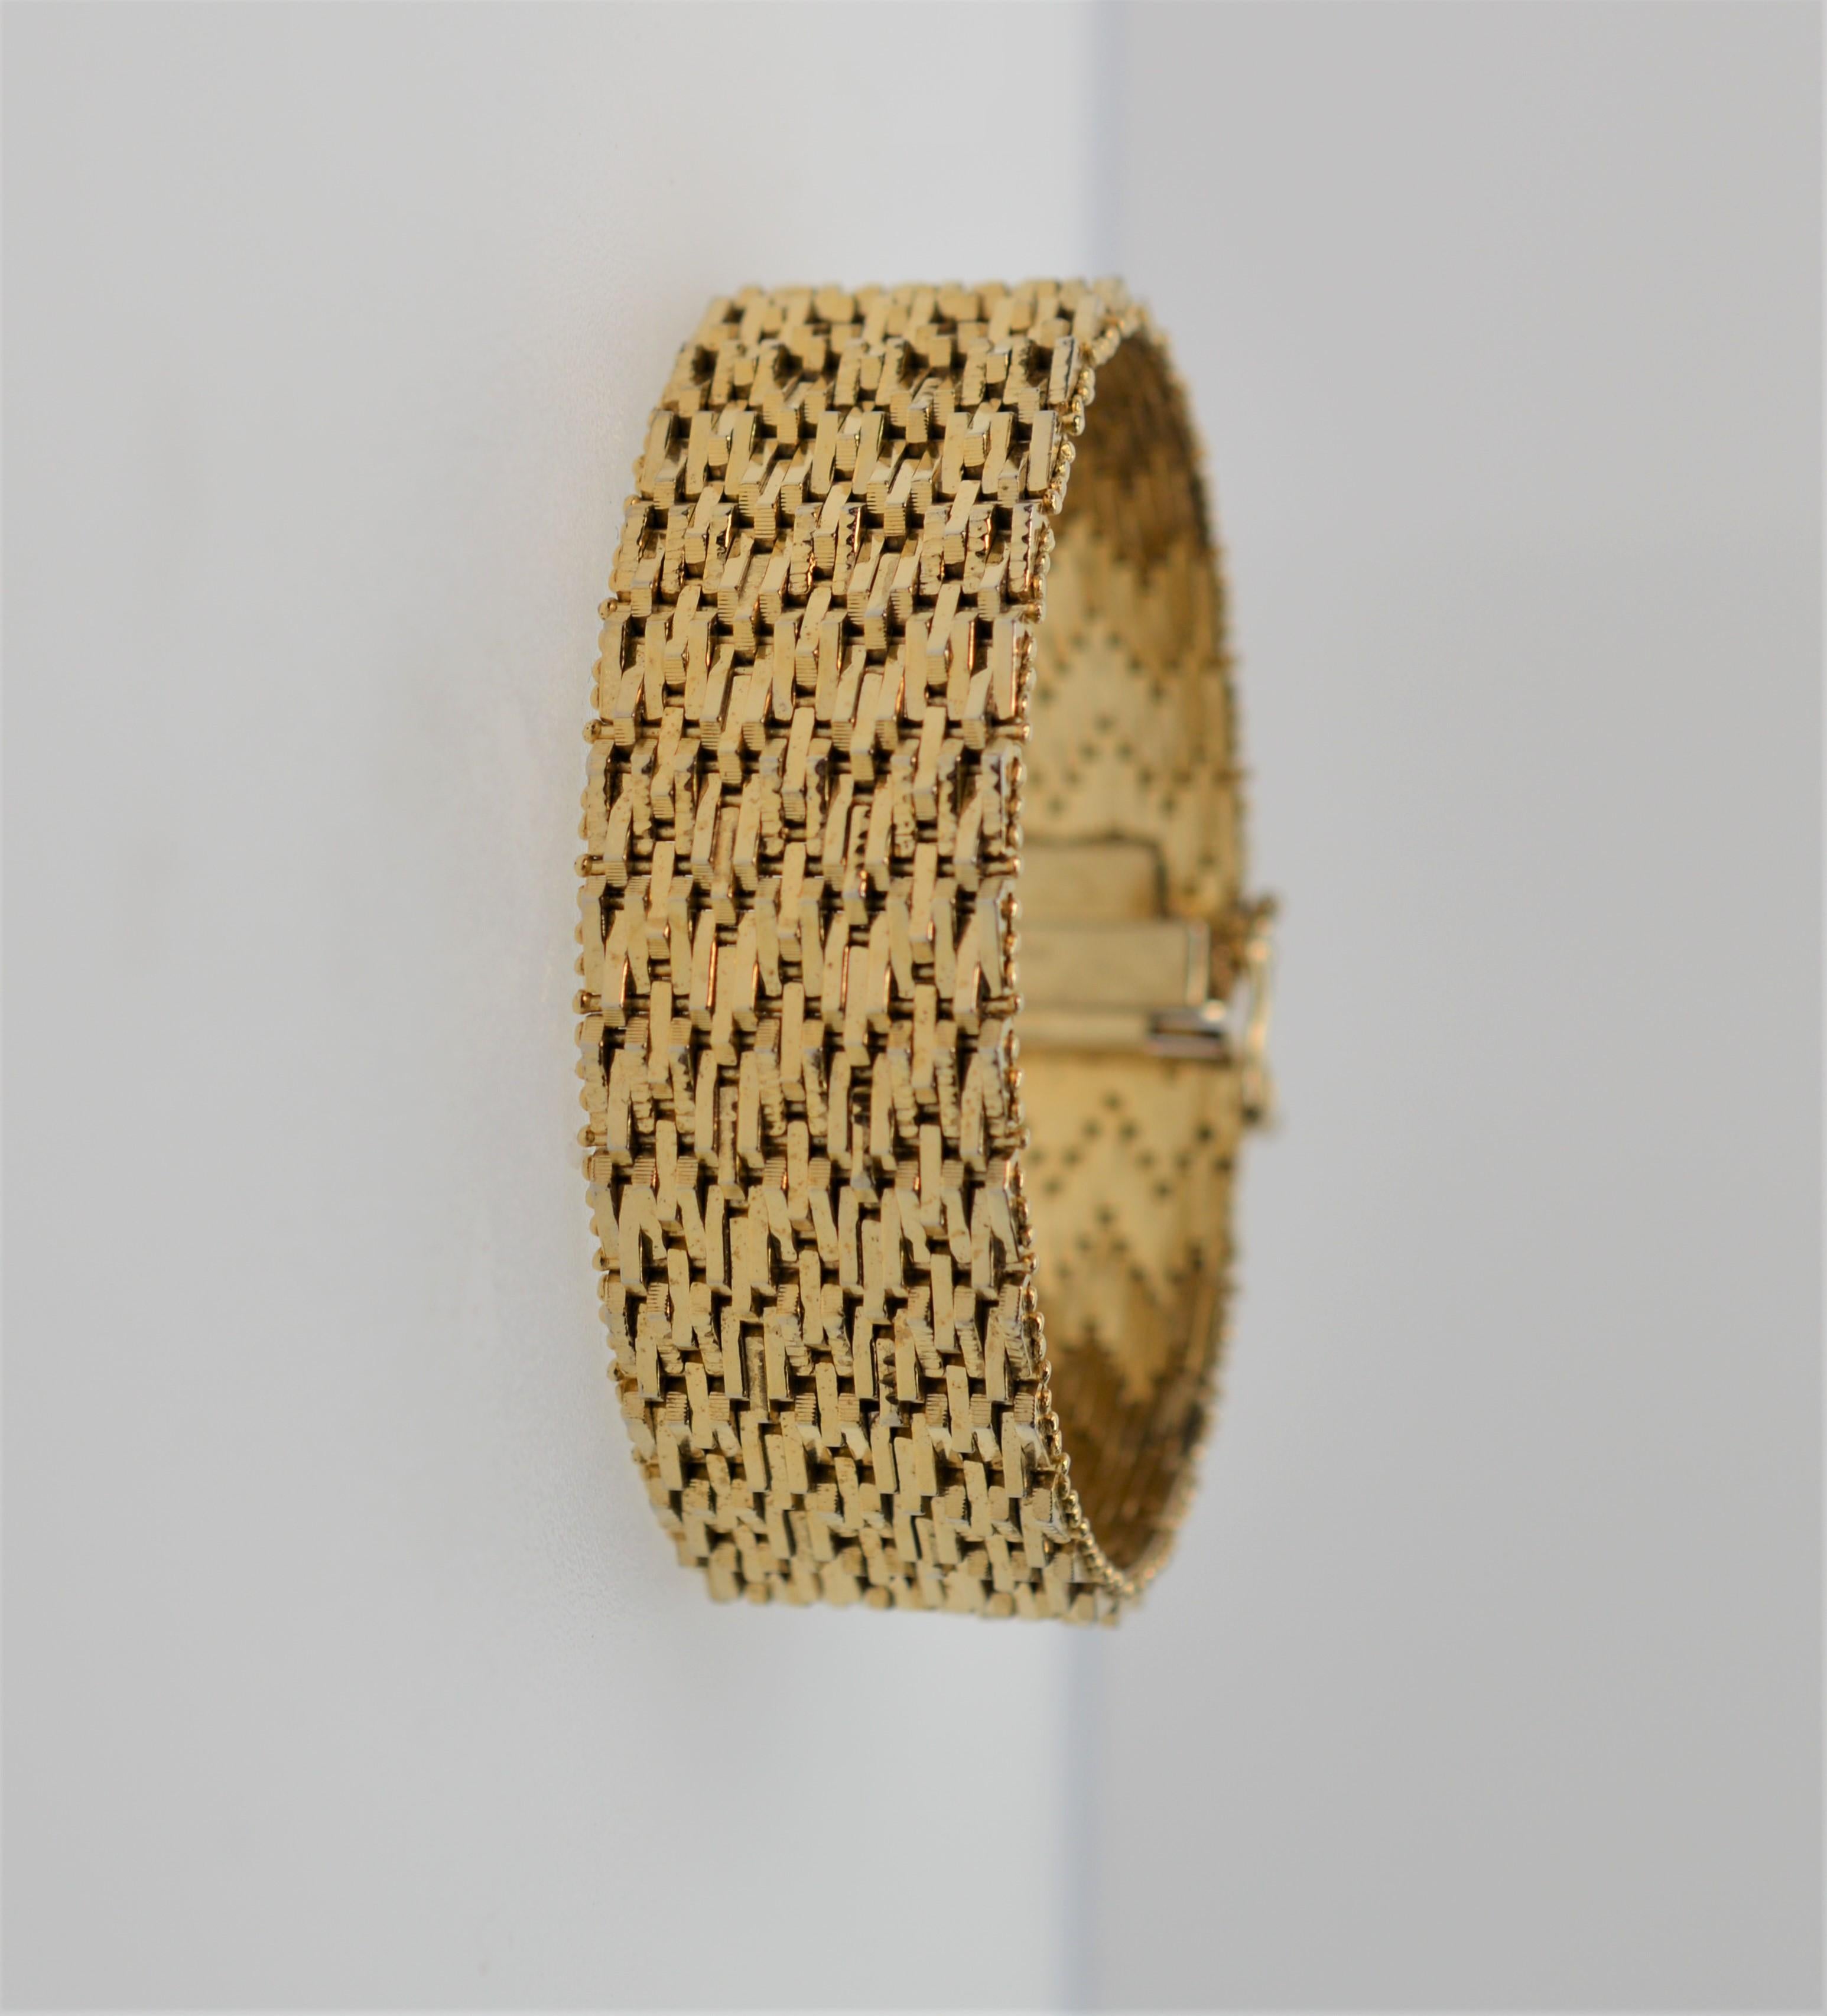 18K Yellow Gold Italian Late 1950's Retro Style Flexible Cuff Bracelet. Measures 7-3/8 inch long by 3/4 inch wide. Substantial unisex piece created with multiple small fluid woven links that give this piece its depth and flexibility. Has catch clasp